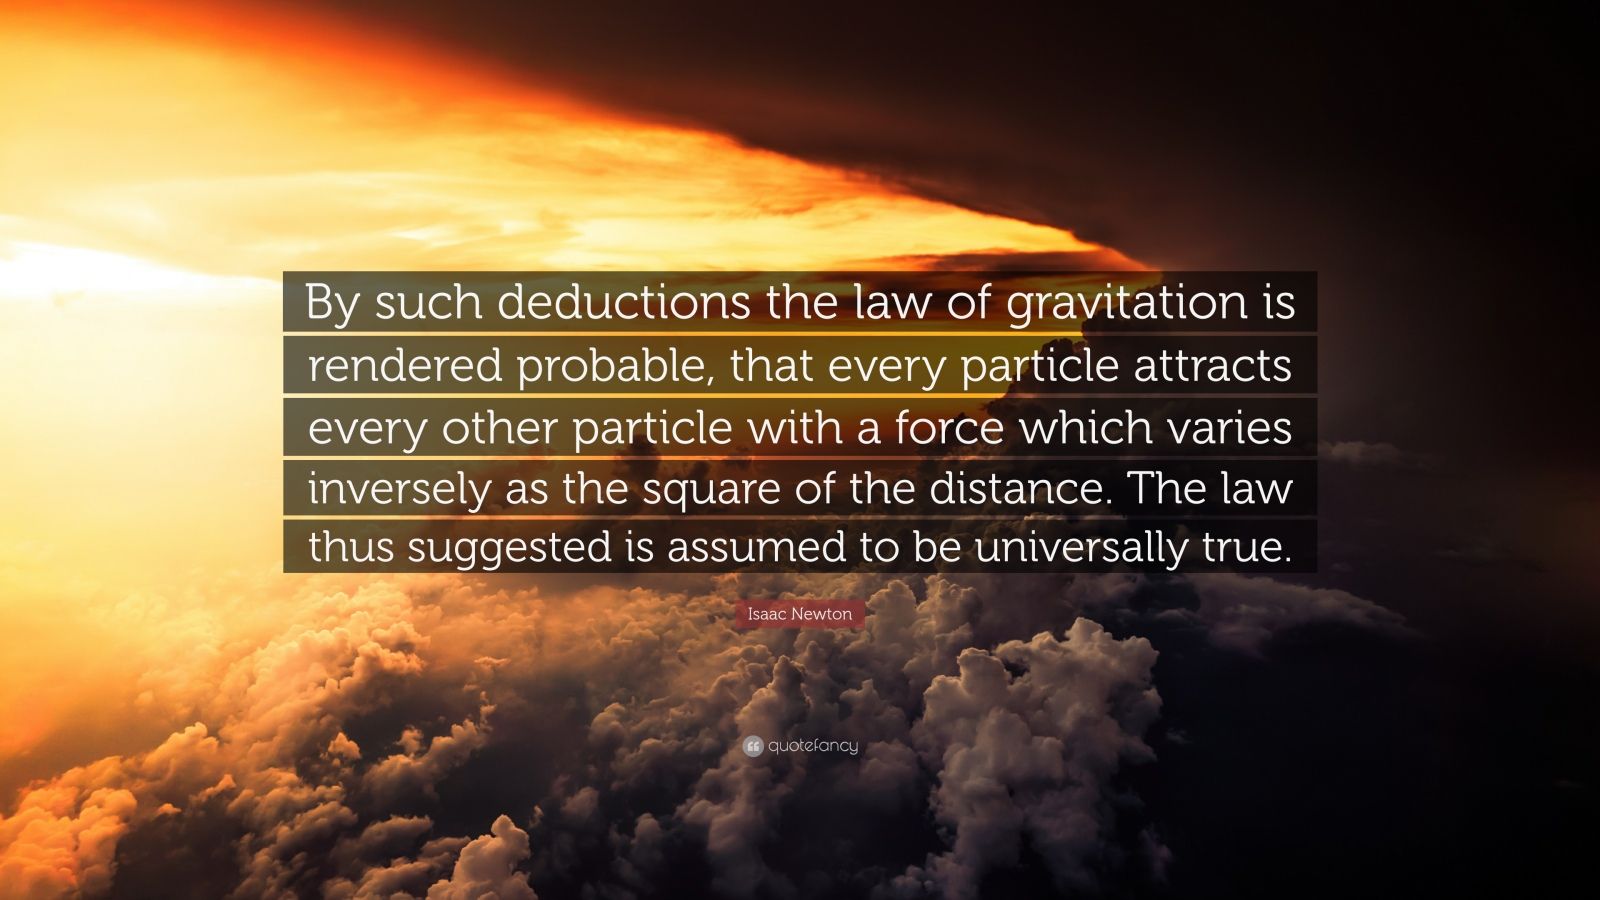 Isaac Newton Quote: "By such deductions the law of gravitation is rendered probable, that every ...